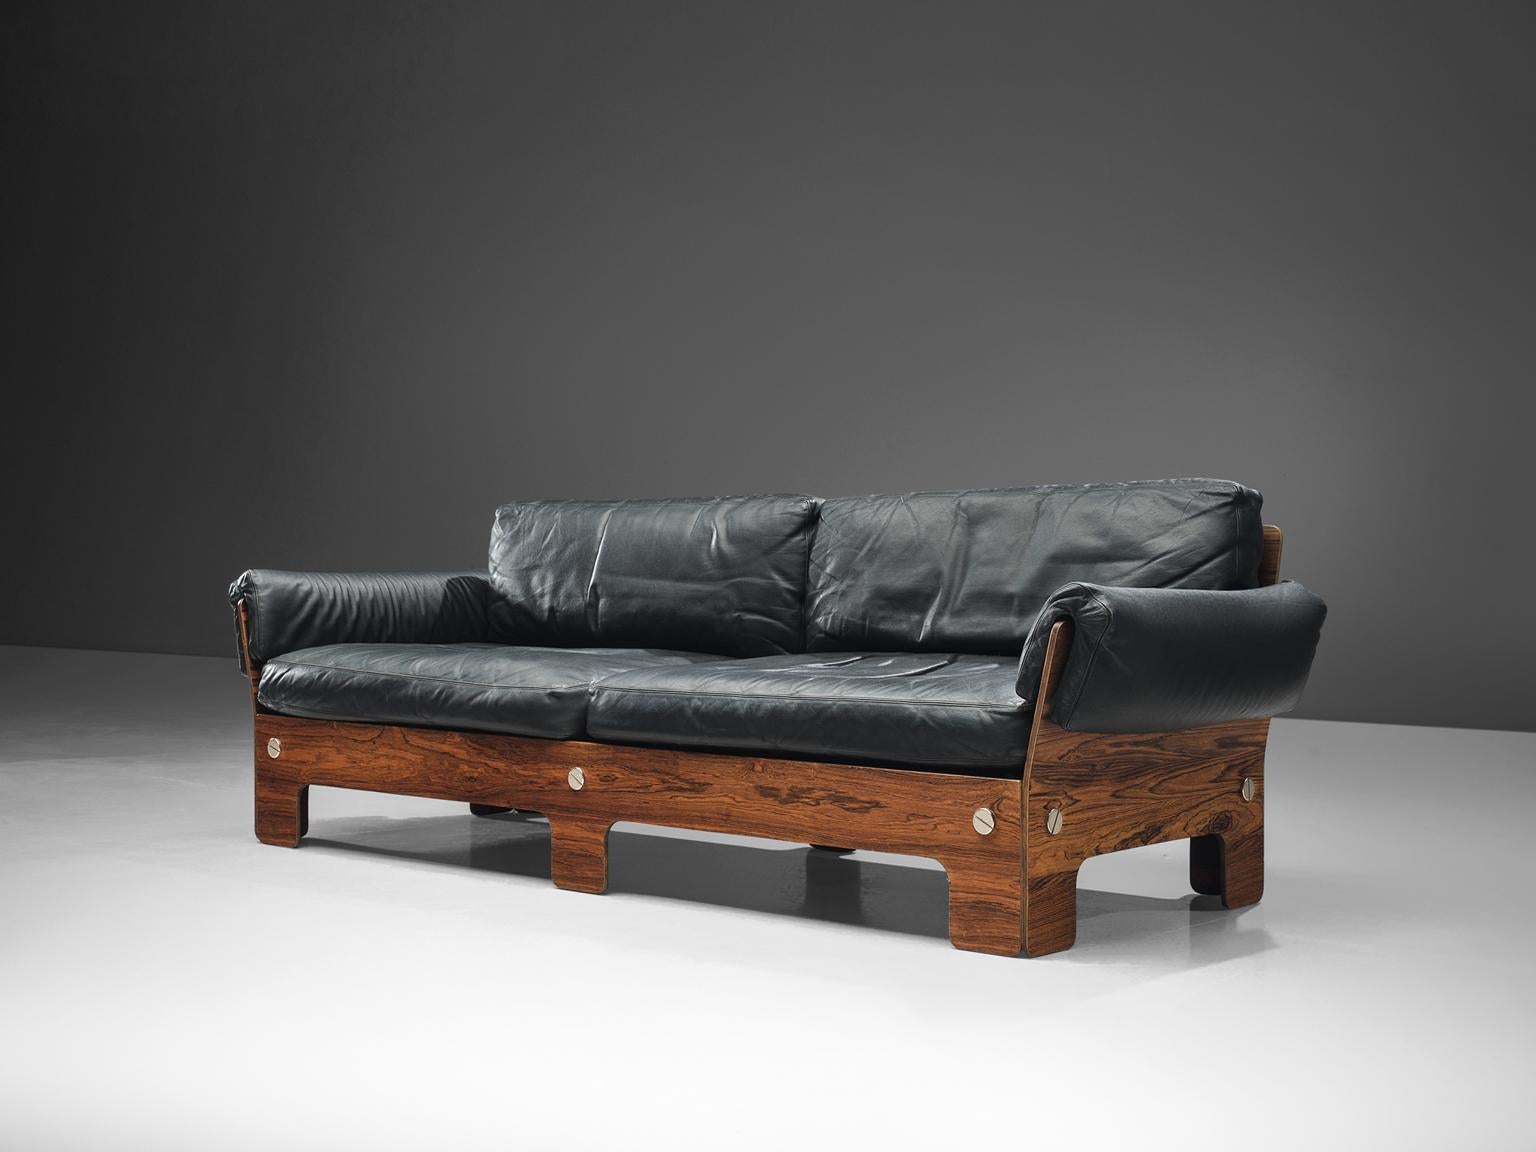 Sofa, rosewood and black leather, Norway, 1960s

This sofa presents very comfortable elements. The boxy look of the sofa is due to it's square and rectangular shape, which creates an potent look.
The cushions are wrapped around the rosewood